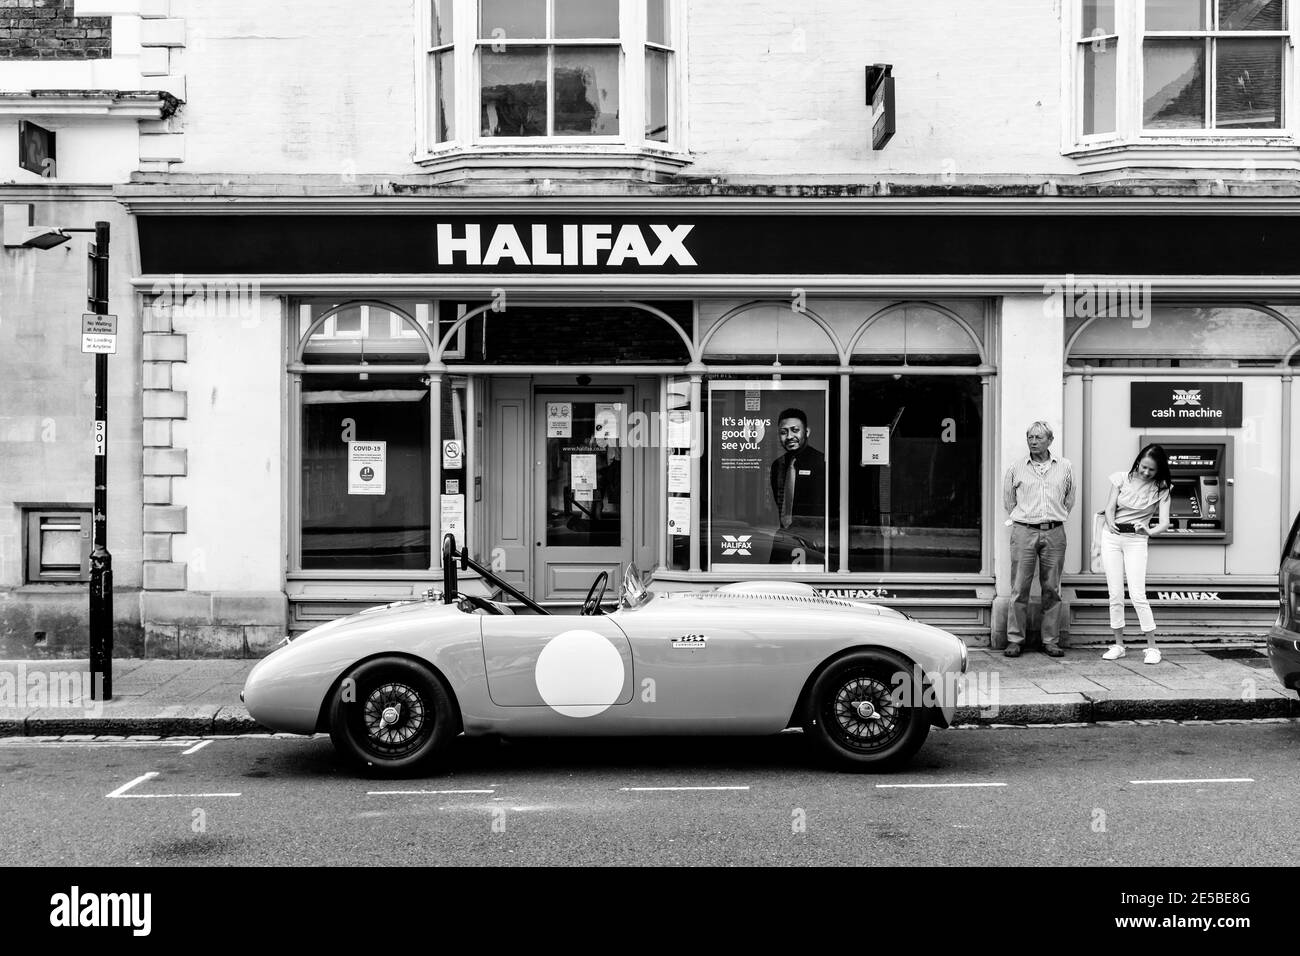 Two People Looking At and Photographing A Classic Sports Car Parked In The High Street, Lewes, East Sussex, UK. Stock Photo